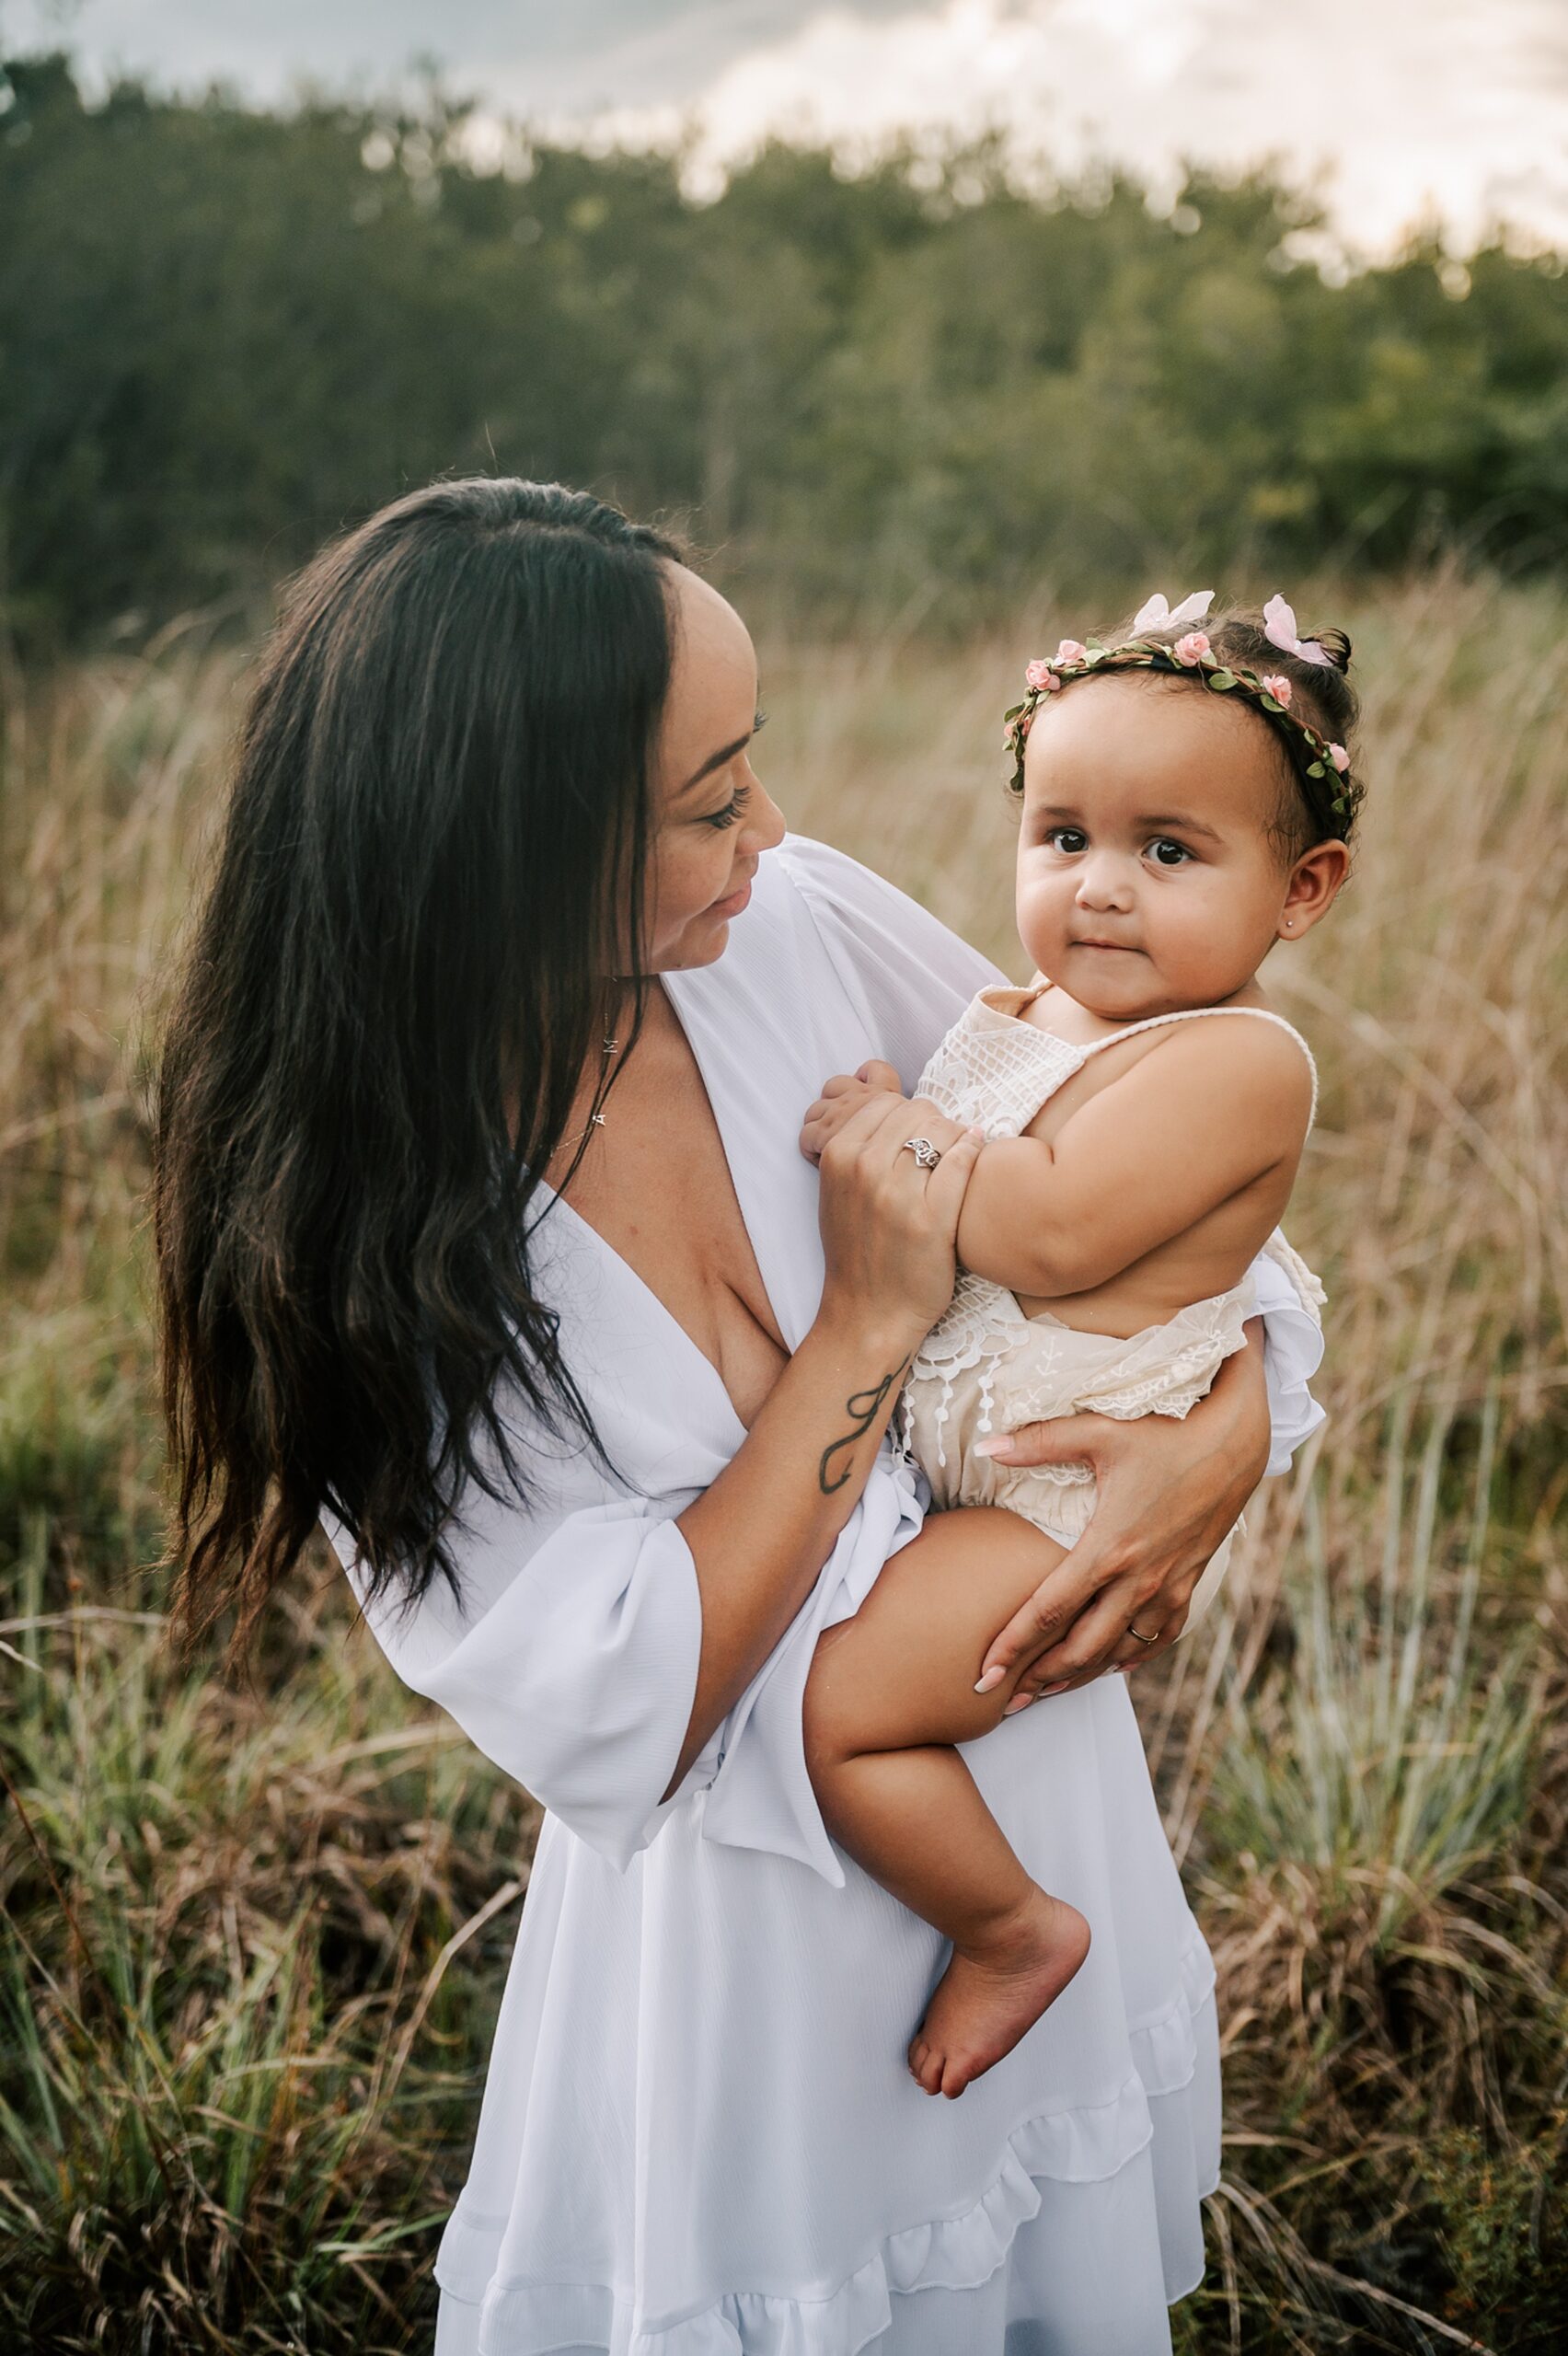 A young mother in a white dress holds her toddler daughter on her hip while standing in a field of golden grass